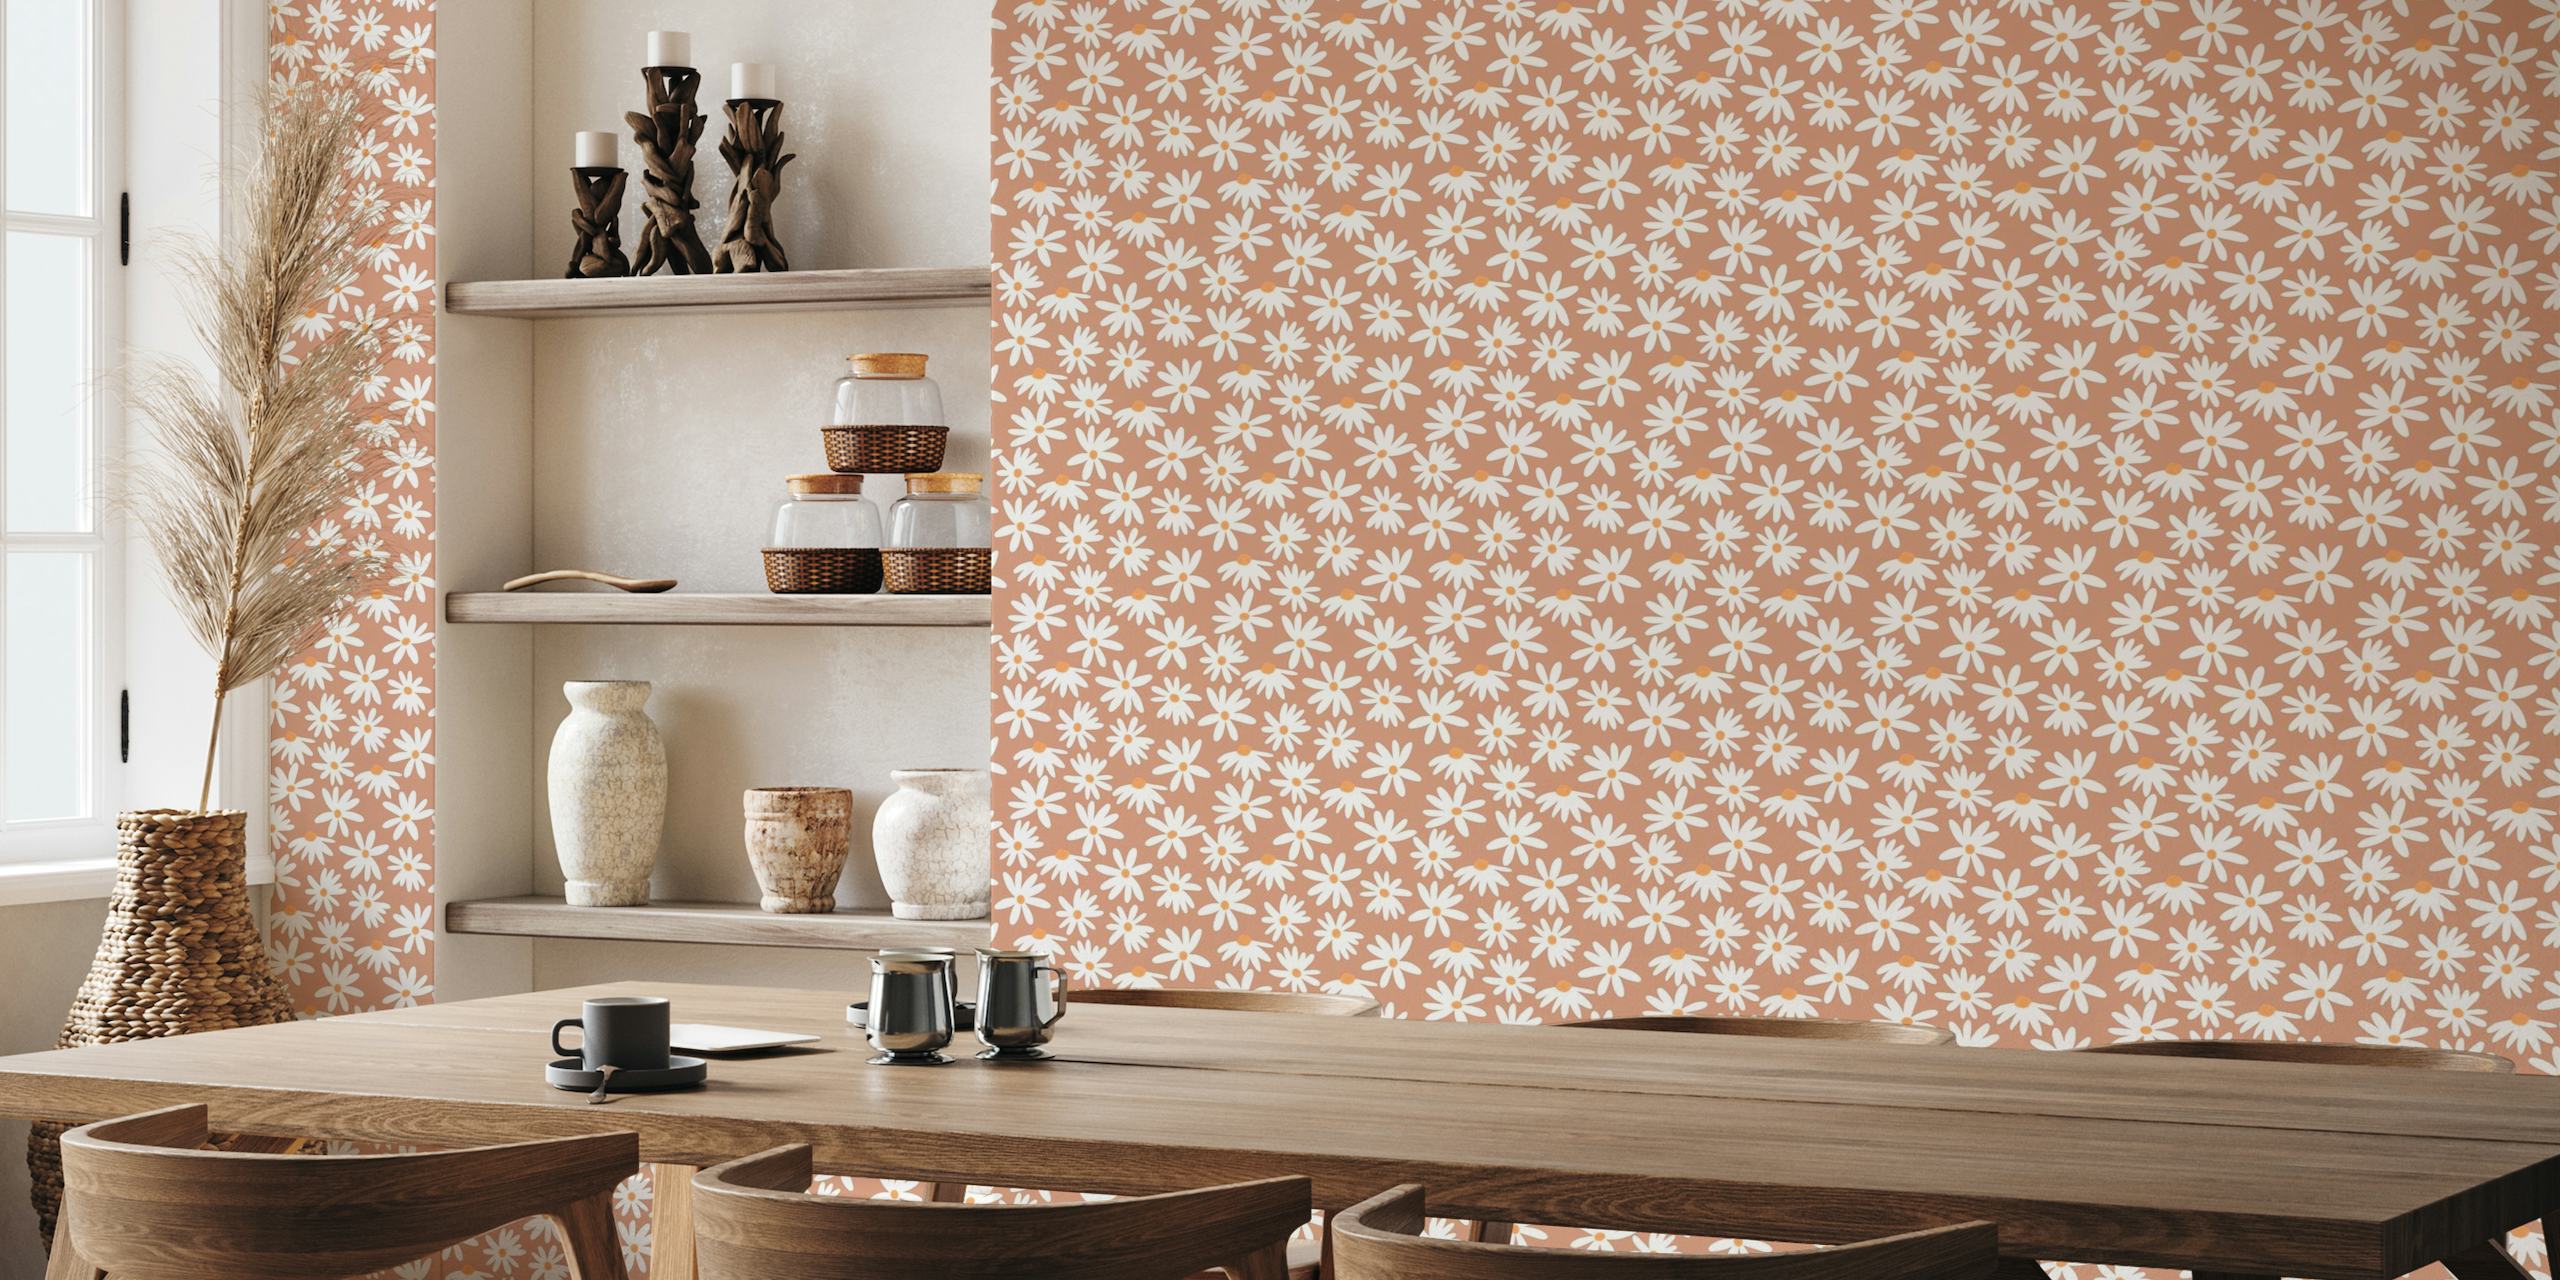 Retro Summer Daisies wall mural with white flowers and orange centers on beige background